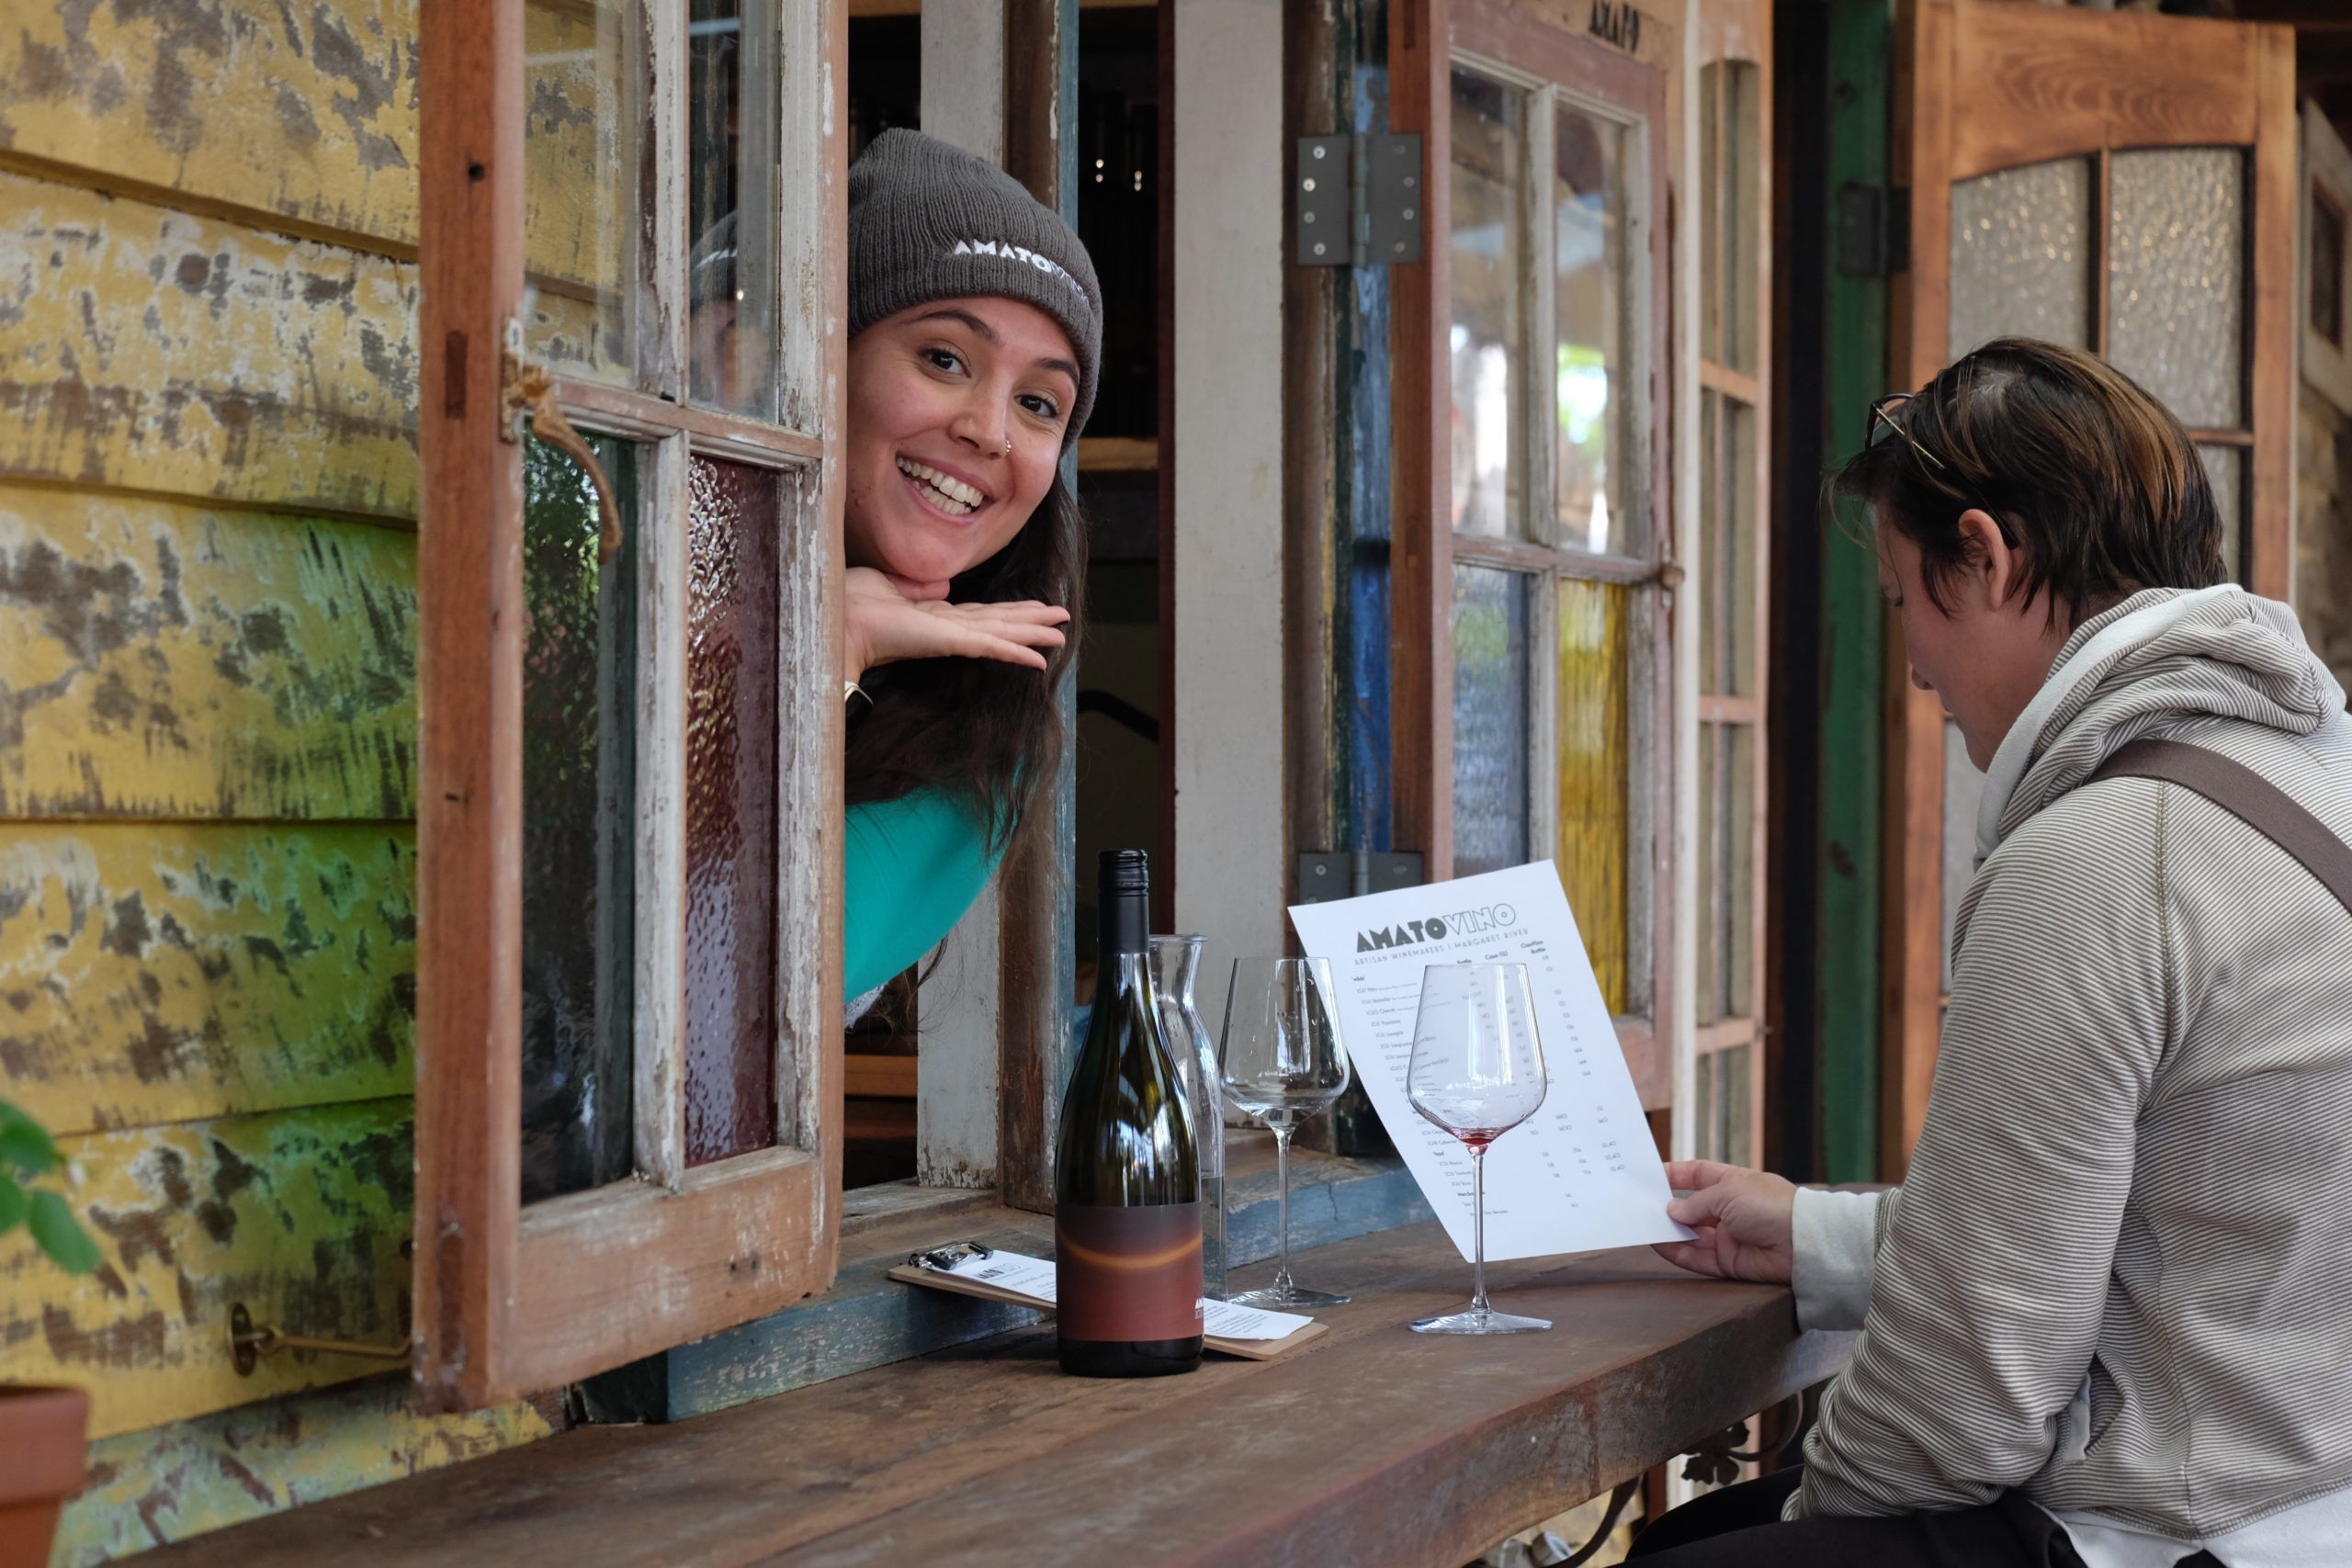 The friendly cellar door at Amato Vino, in Witchcliffe